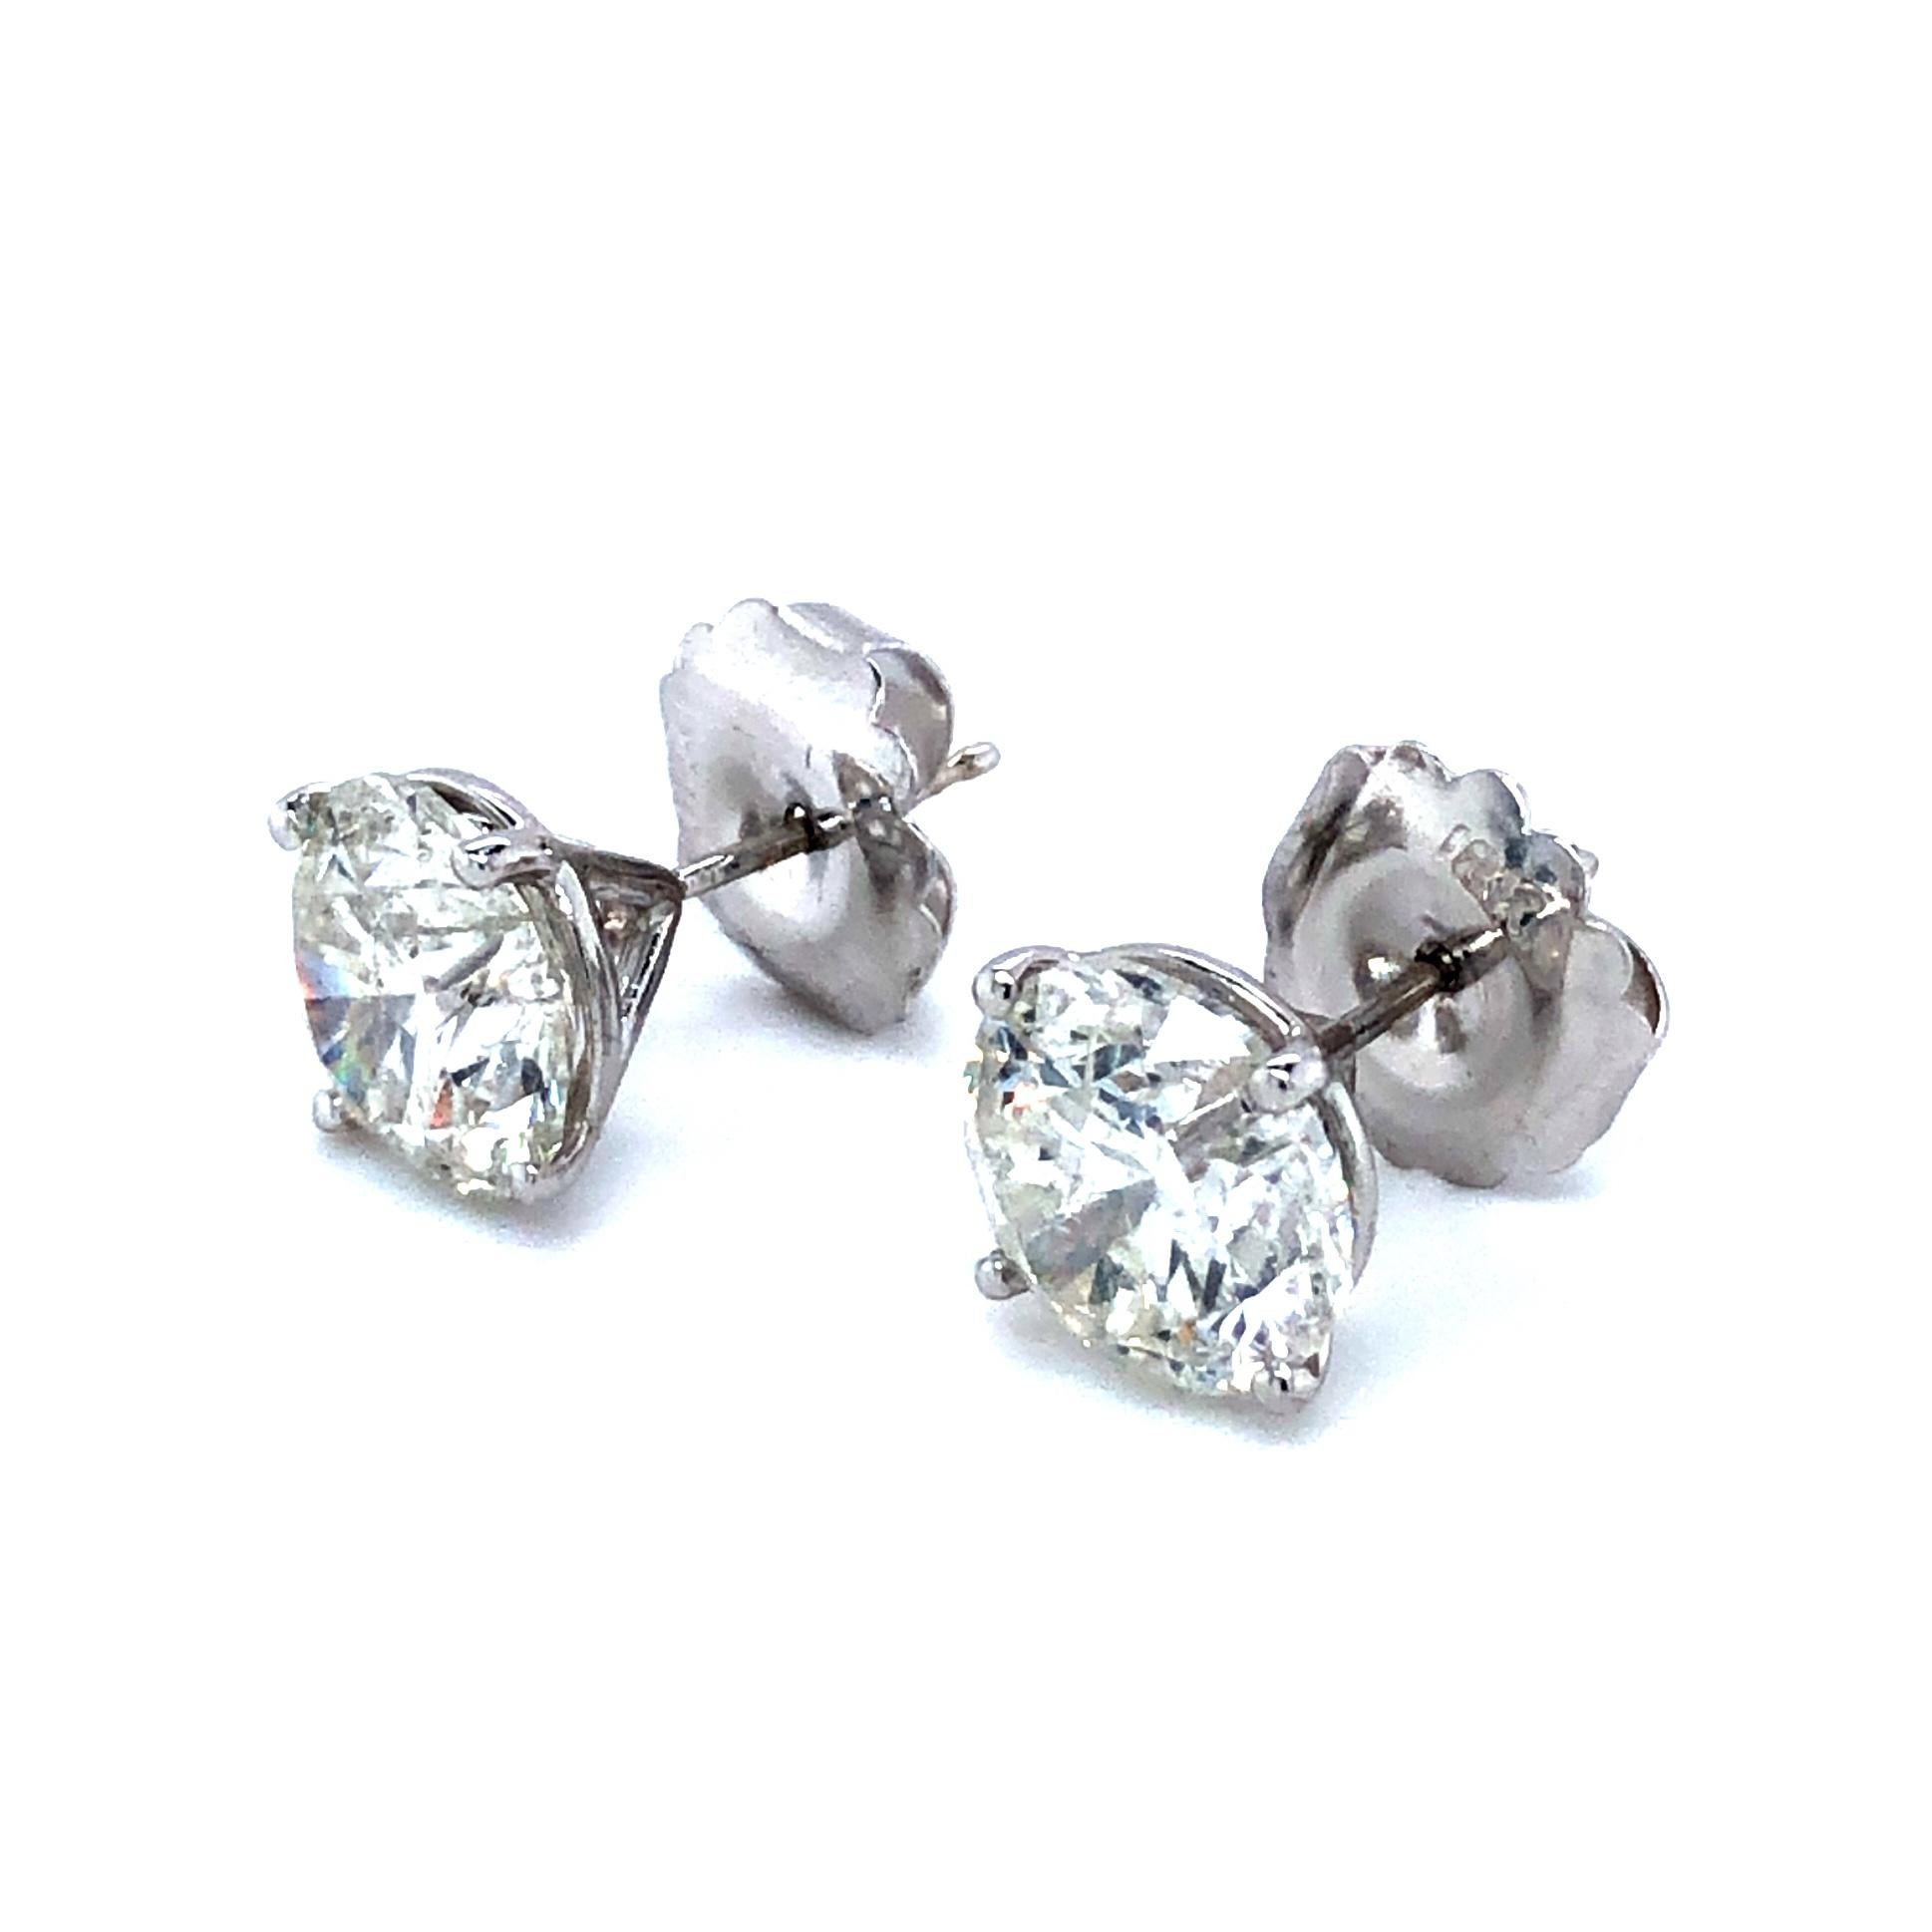 Offered here is a classic diamond studs set in 18k white gold. The diamonds are natural round brilliant cut H color and Si3-I1 with a total weight of 6.31 carats. The diamond are set in four prong martini settings ( stamped 18k on the heavy push